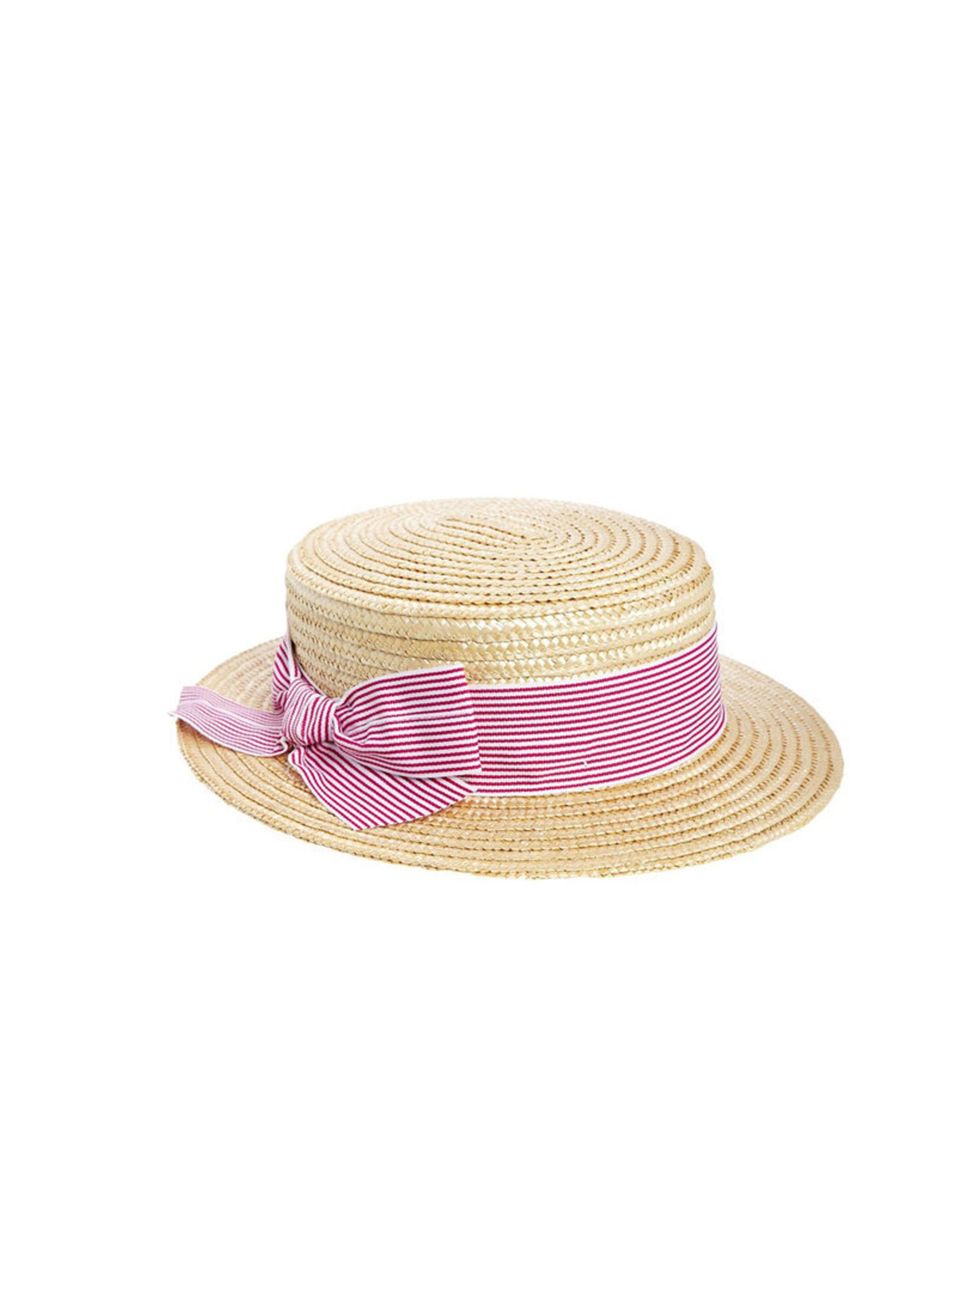 <p>Pass the Pimms.</p><p><a href="http://www.asos.com/Catarzi/Catarzi-Boater-With-Candy-Stripe/Prod/pgeproduct.aspx?iid=3900745&amp;SearchQuery=boater&amp;sh=0&amp;pge=0&amp;pgesize=36&amp;sort=-1&amp;clr=Natural">Asos</a> boater, £30</p>